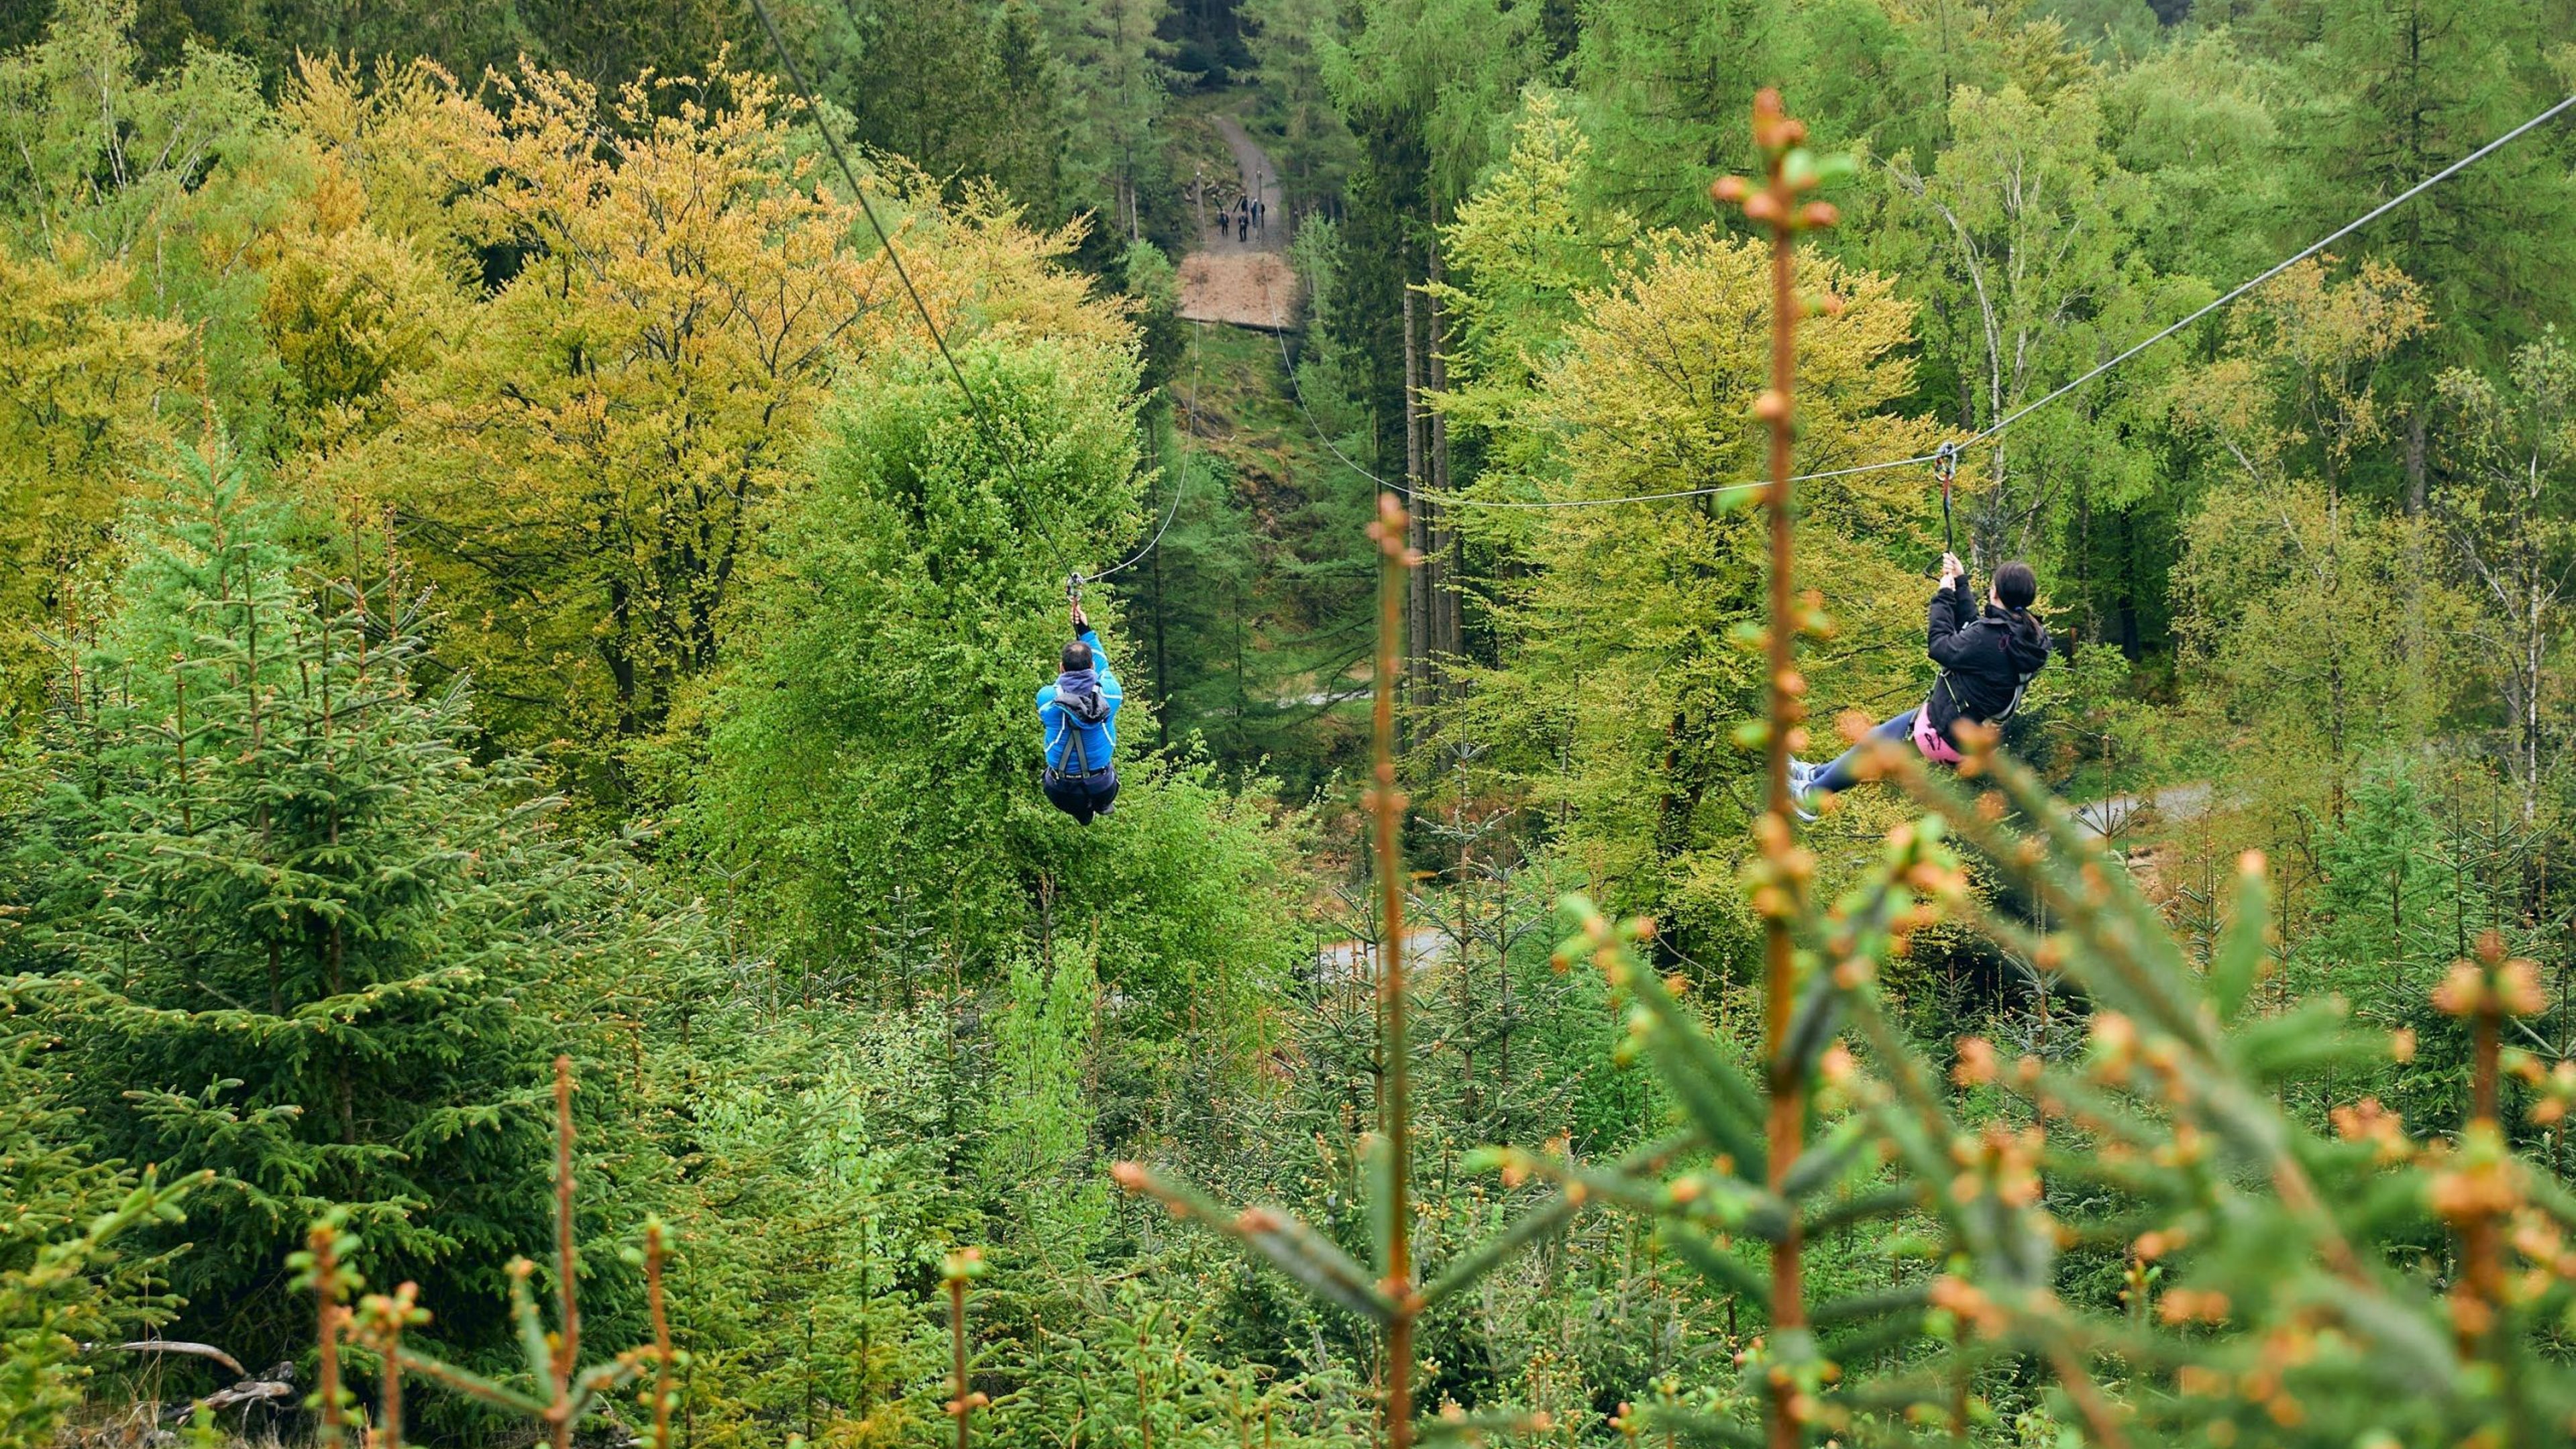 Go Ape in Grizedale Forest